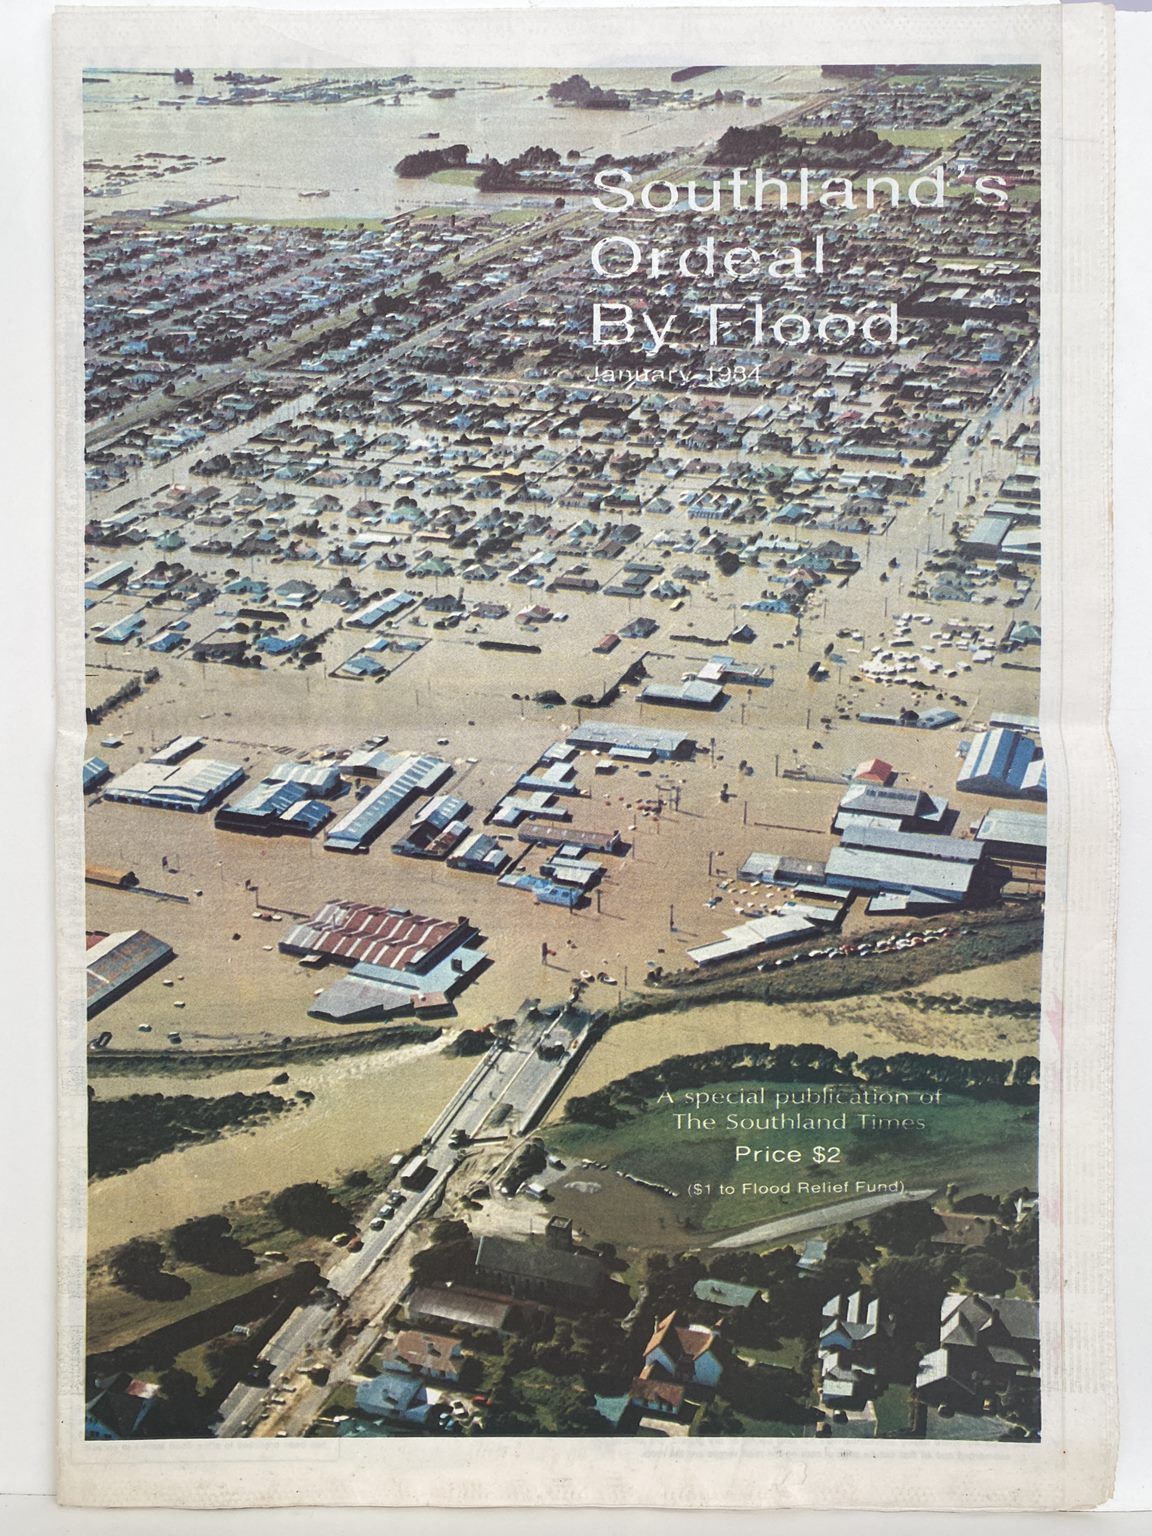 OLD NEWSPAPER: Southland's Ordeal by Flood, Southland Times Special January 1984